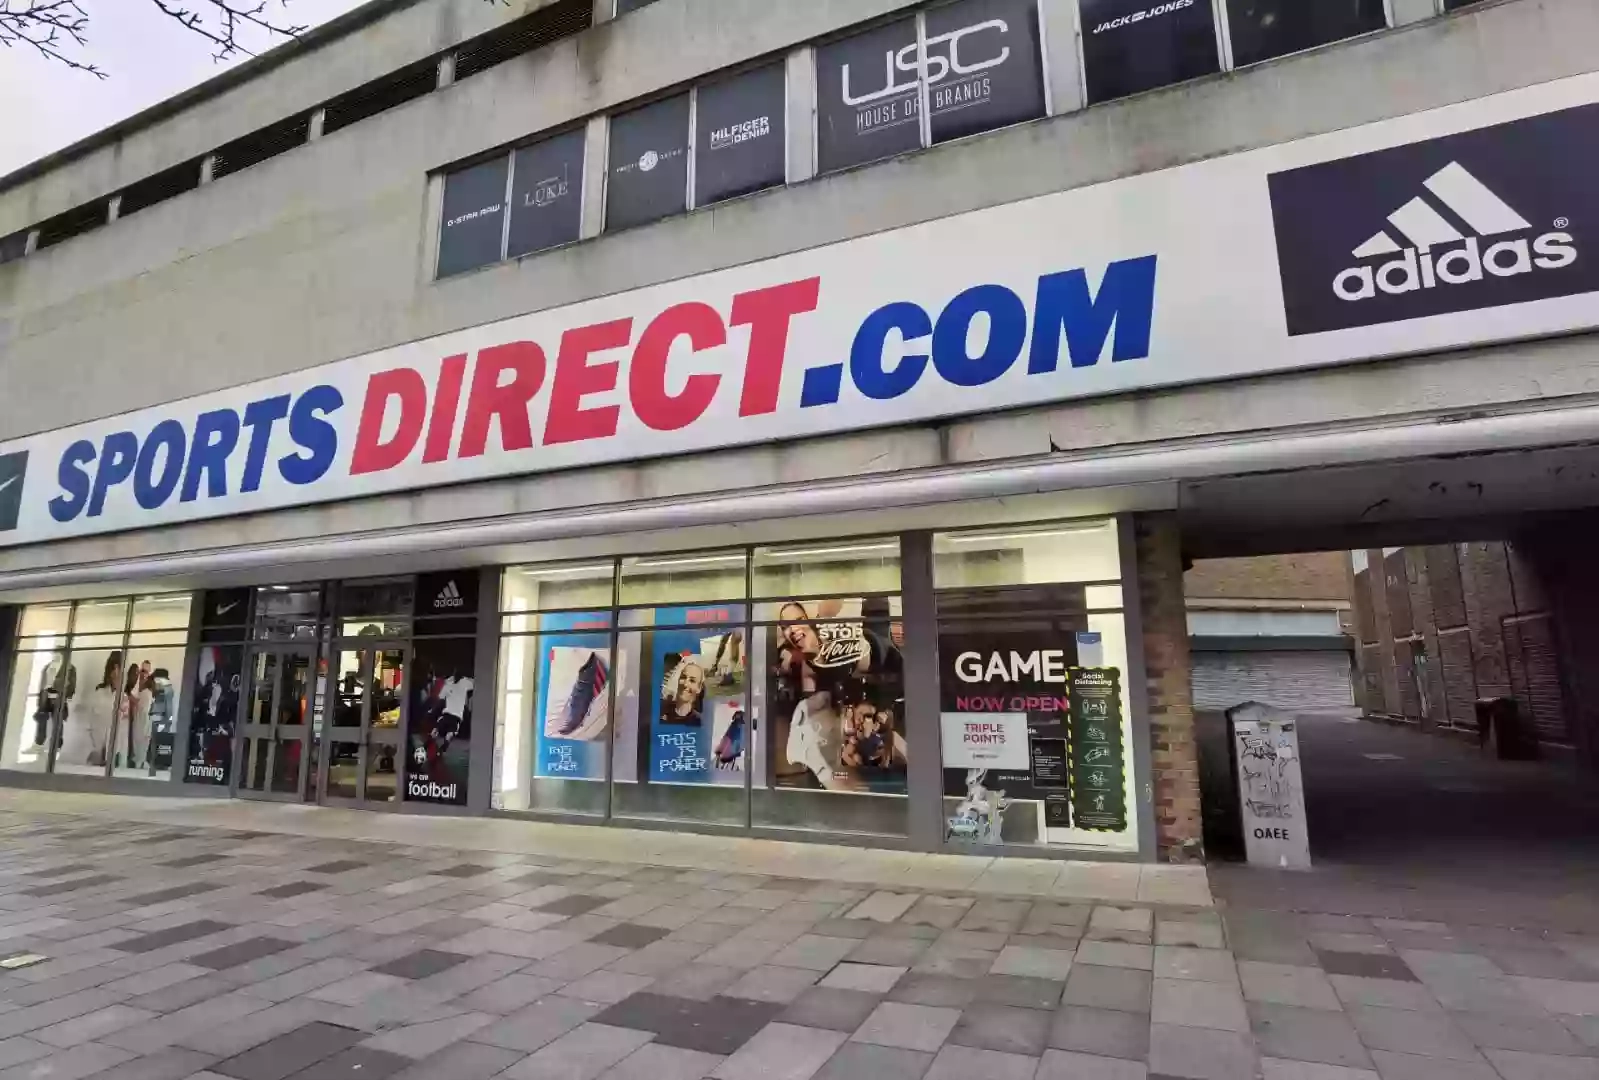 GAME Plymouth inside Sports Direct